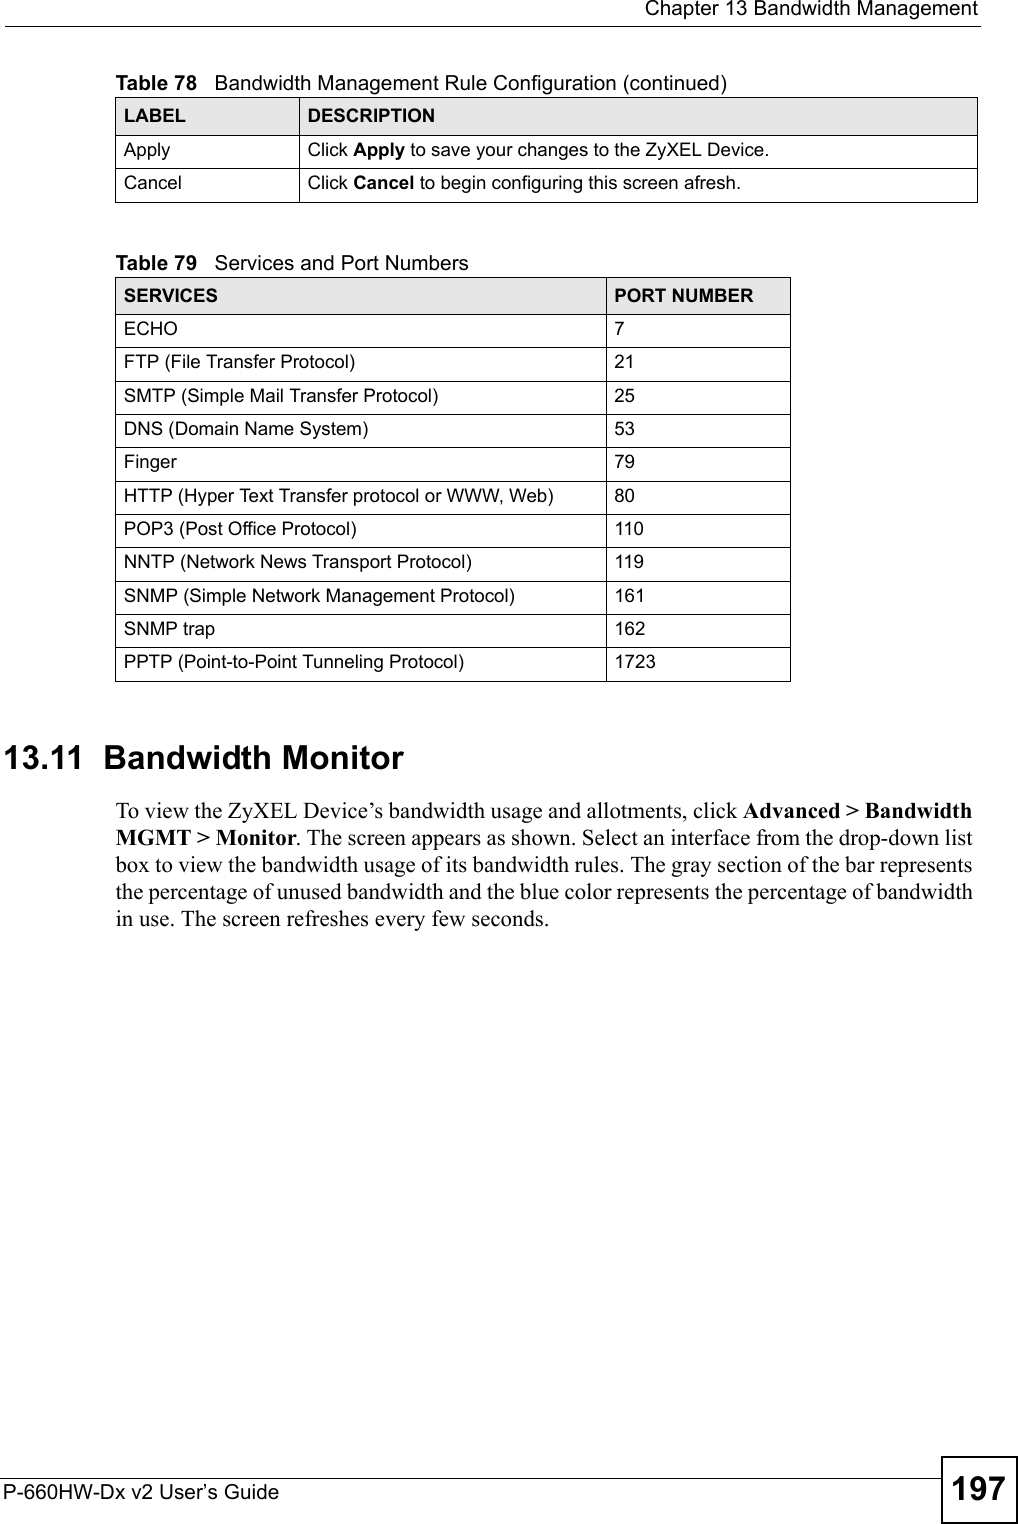  Chapter 13 Bandwidth ManagementP-660HW-Dx v2 User’s Guide 19713.11  Bandwidth Monitor To view the ZyXEL Device’s bandwidth usage and allotments, click Advanced &gt; Bandwidth MGMT &gt; Monitor. The screen appears as shown. Select an interface from the drop-down list box to view the bandwidth usage of its bandwidth rules. The gray section of the bar represents the percentage of unused bandwidth and the blue color represents the percentage of bandwidth in use. The screen refreshes every few seconds.Apply Click Apply to save your changes to the ZyXEL Device.Cancel Click Cancel to begin configuring this screen afresh.Table 79   Services and Port NumbersSERVICES PORT NUMBERECHO 7FTP (File Transfer Protocol) 21SMTP (Simple Mail Transfer Protocol) 25DNS (Domain Name System) 53Finger 79HTTP (Hyper Text Transfer protocol or WWW, Web) 80POP3 (Post Office Protocol) 110NNTP (Network News Transport Protocol) 119SNMP (Simple Network Management Protocol) 161SNMP trap 162PPTP (Point-to-Point Tunneling Protocol) 1723Table 78   Bandwidth Management Rule Configuration (continued)LABEL DESCRIPTION